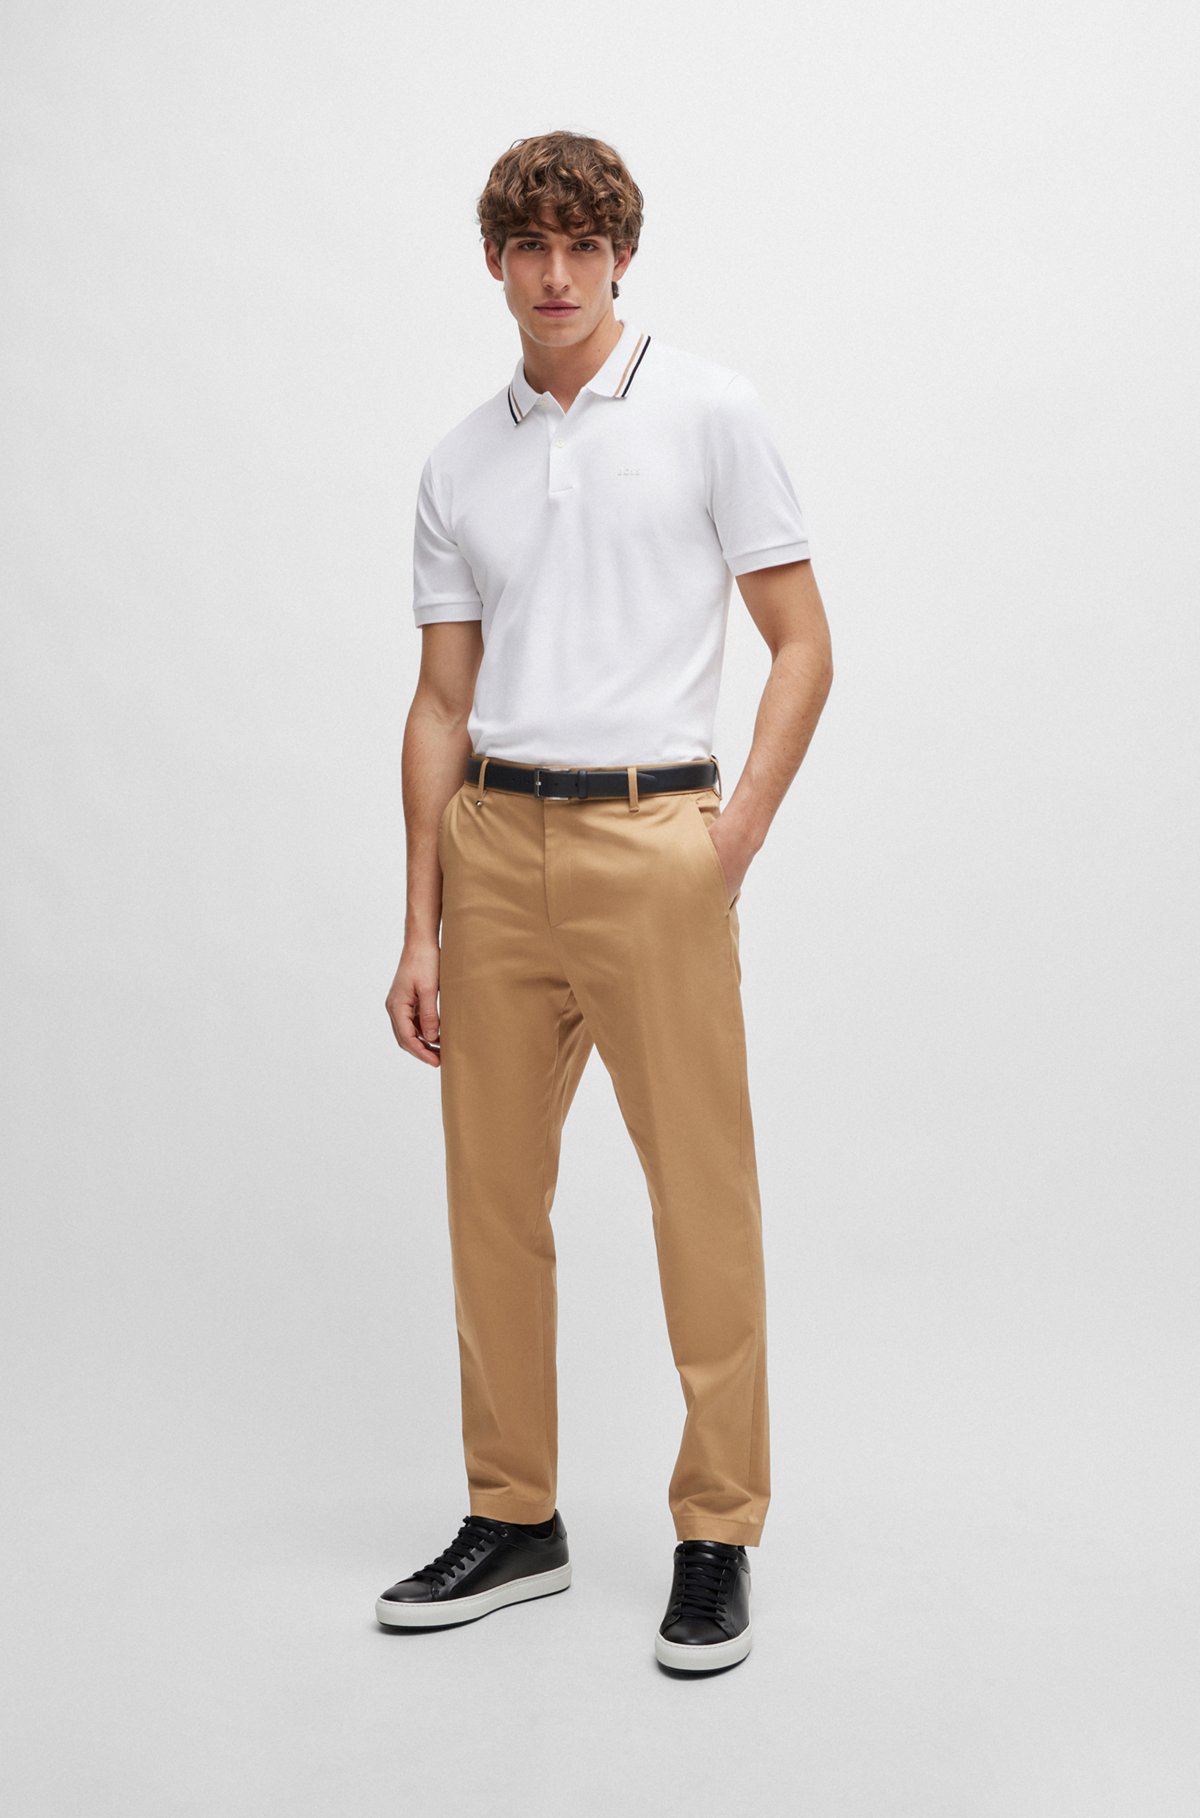 Slim-fit polo shirt in cotton with striped collar, White